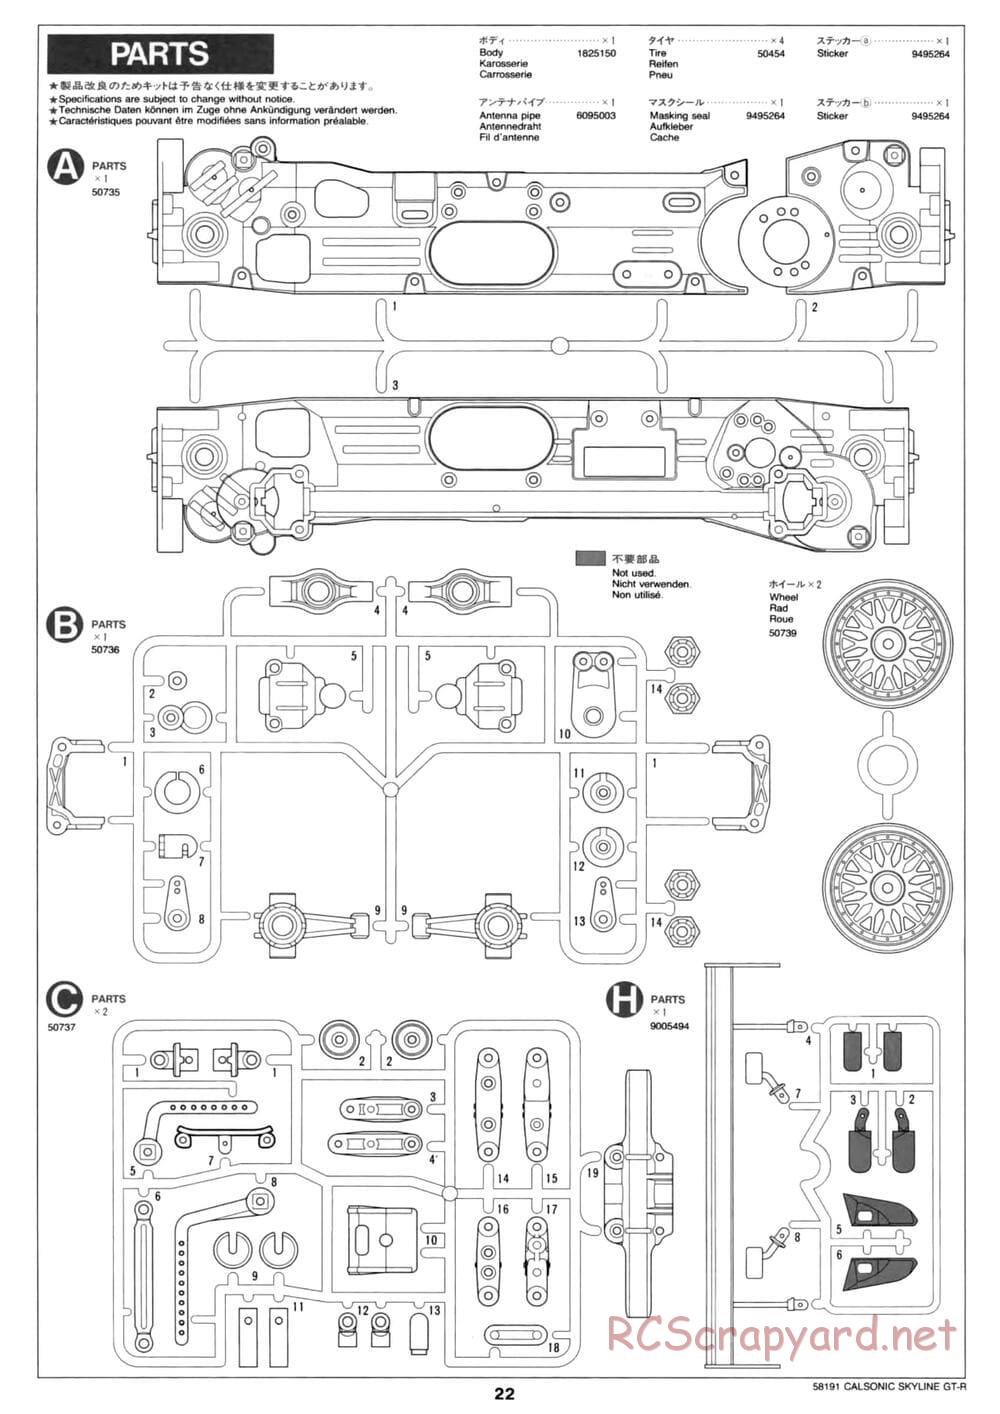 Tamiya - Calsonic Skyline GT-R - TL-01 Chassis - Manual - Page 22